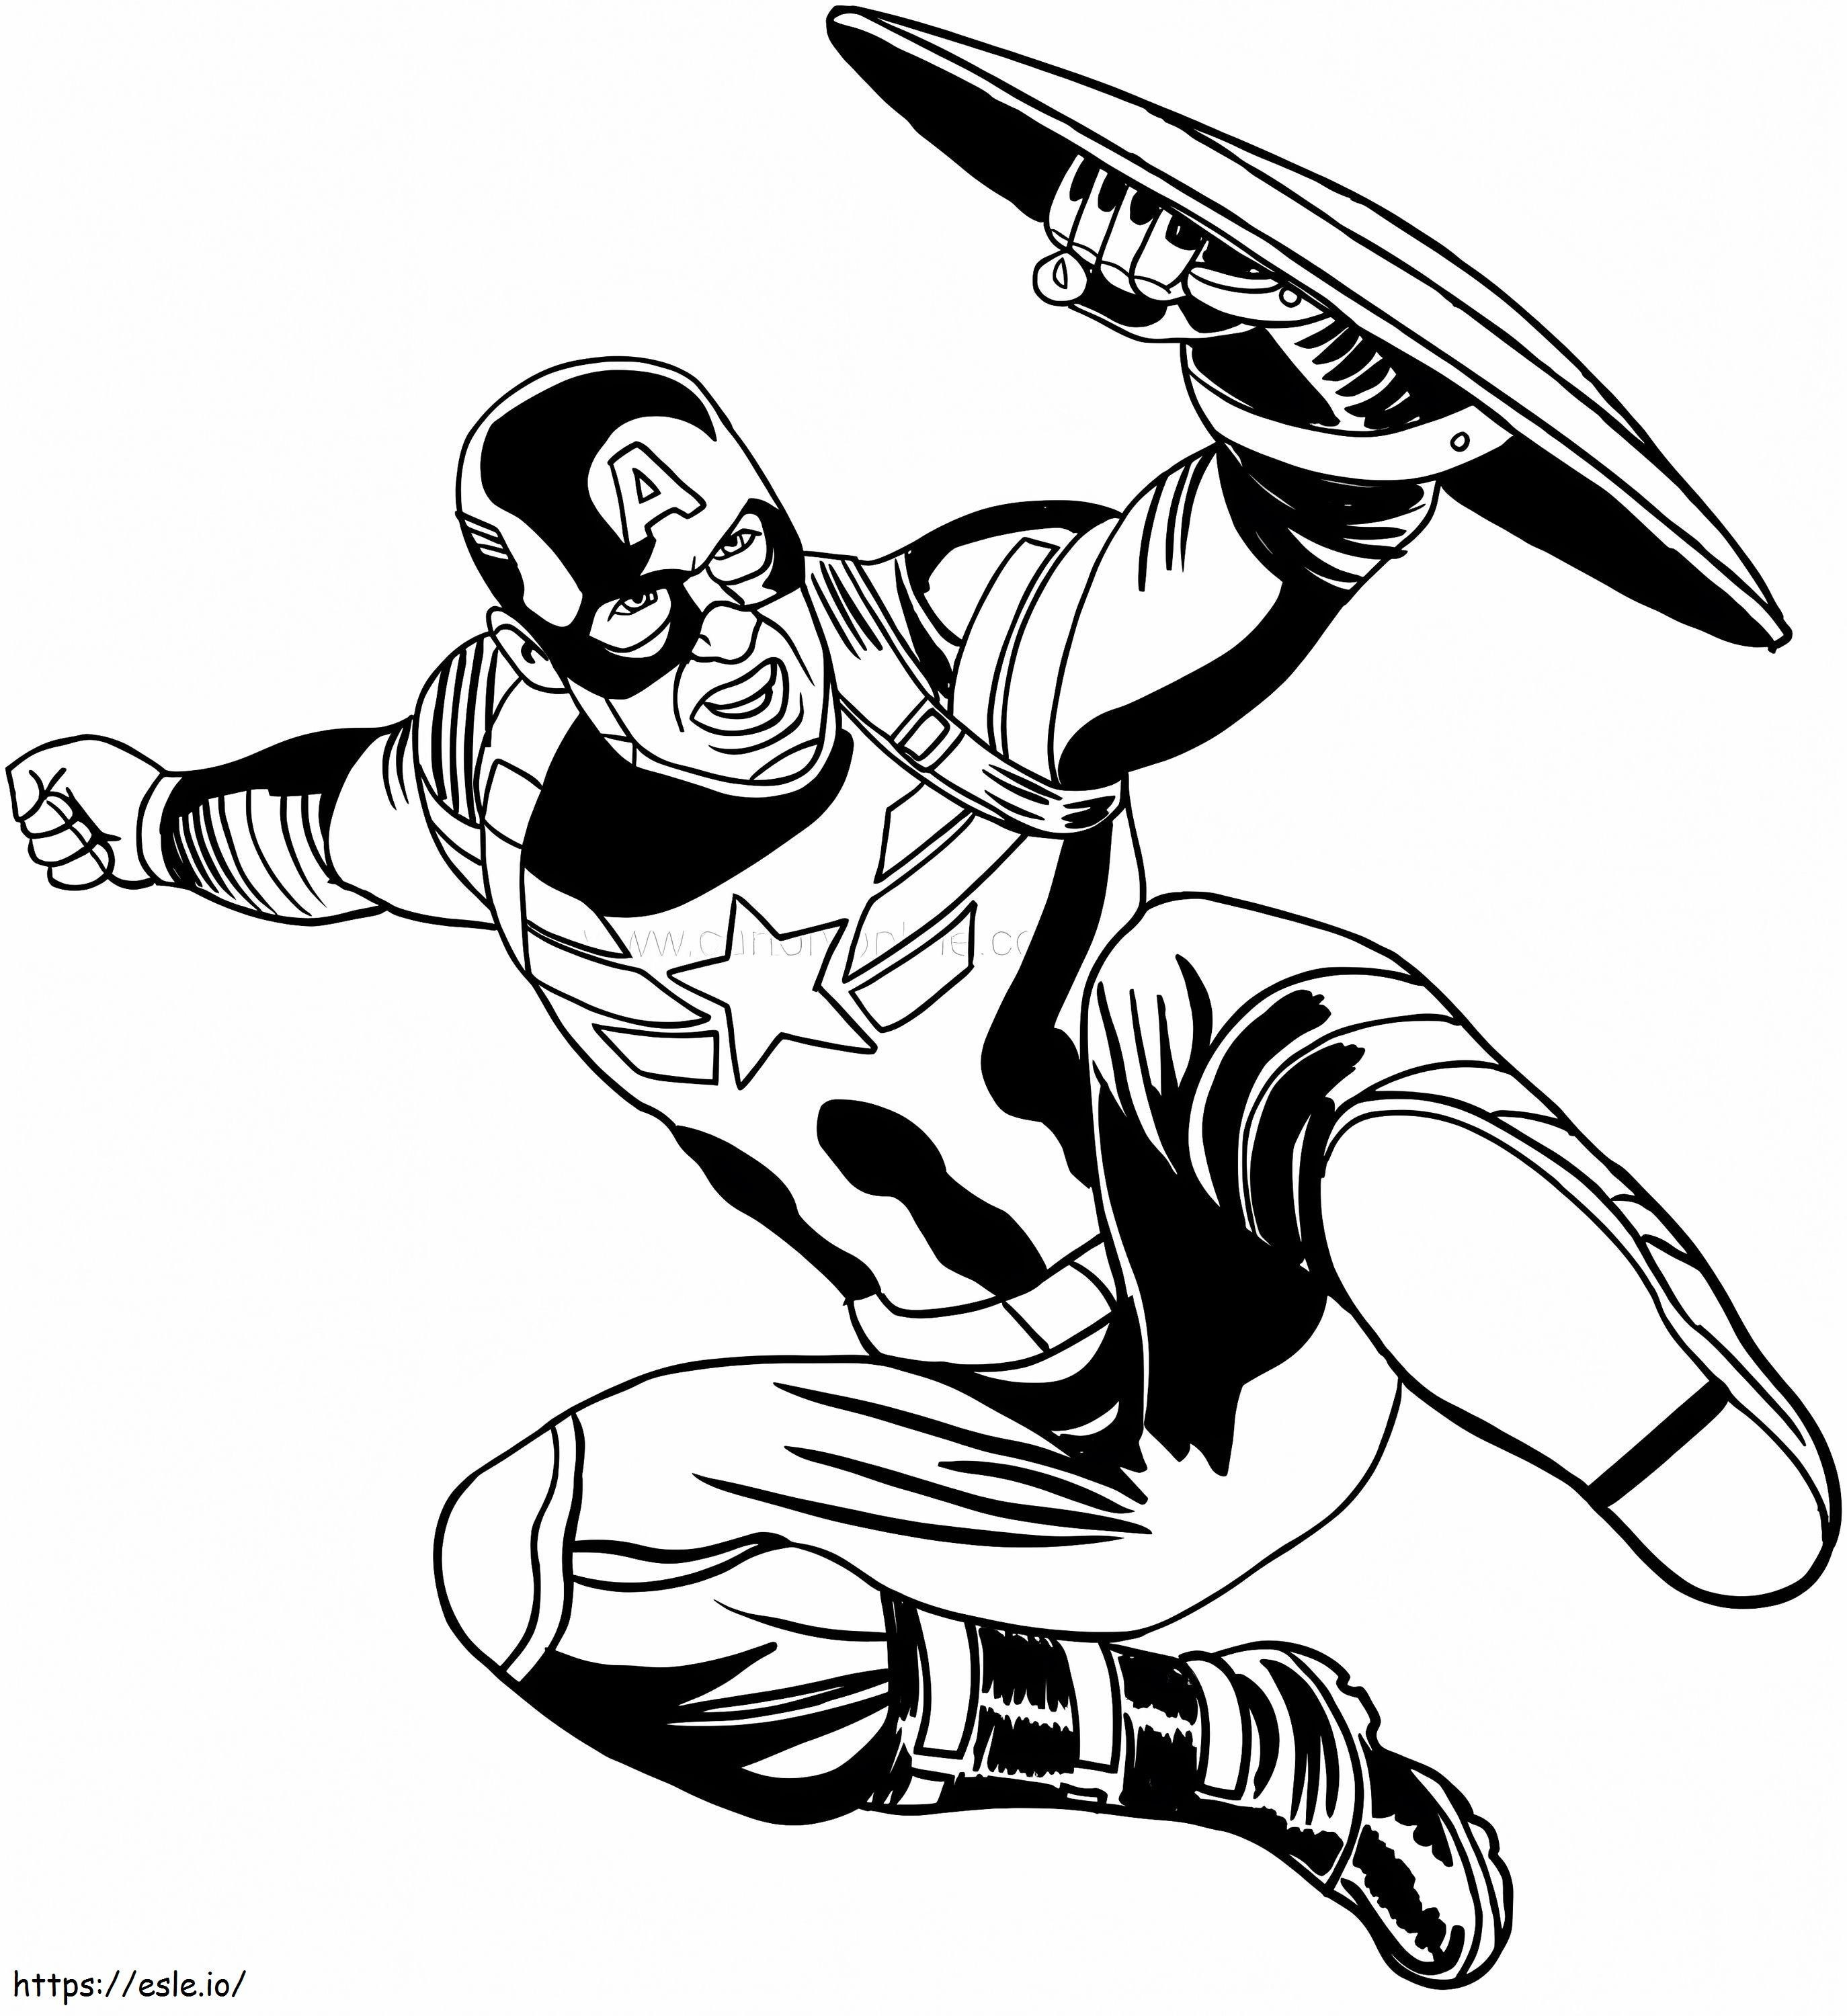 Captain America In Action coloring page